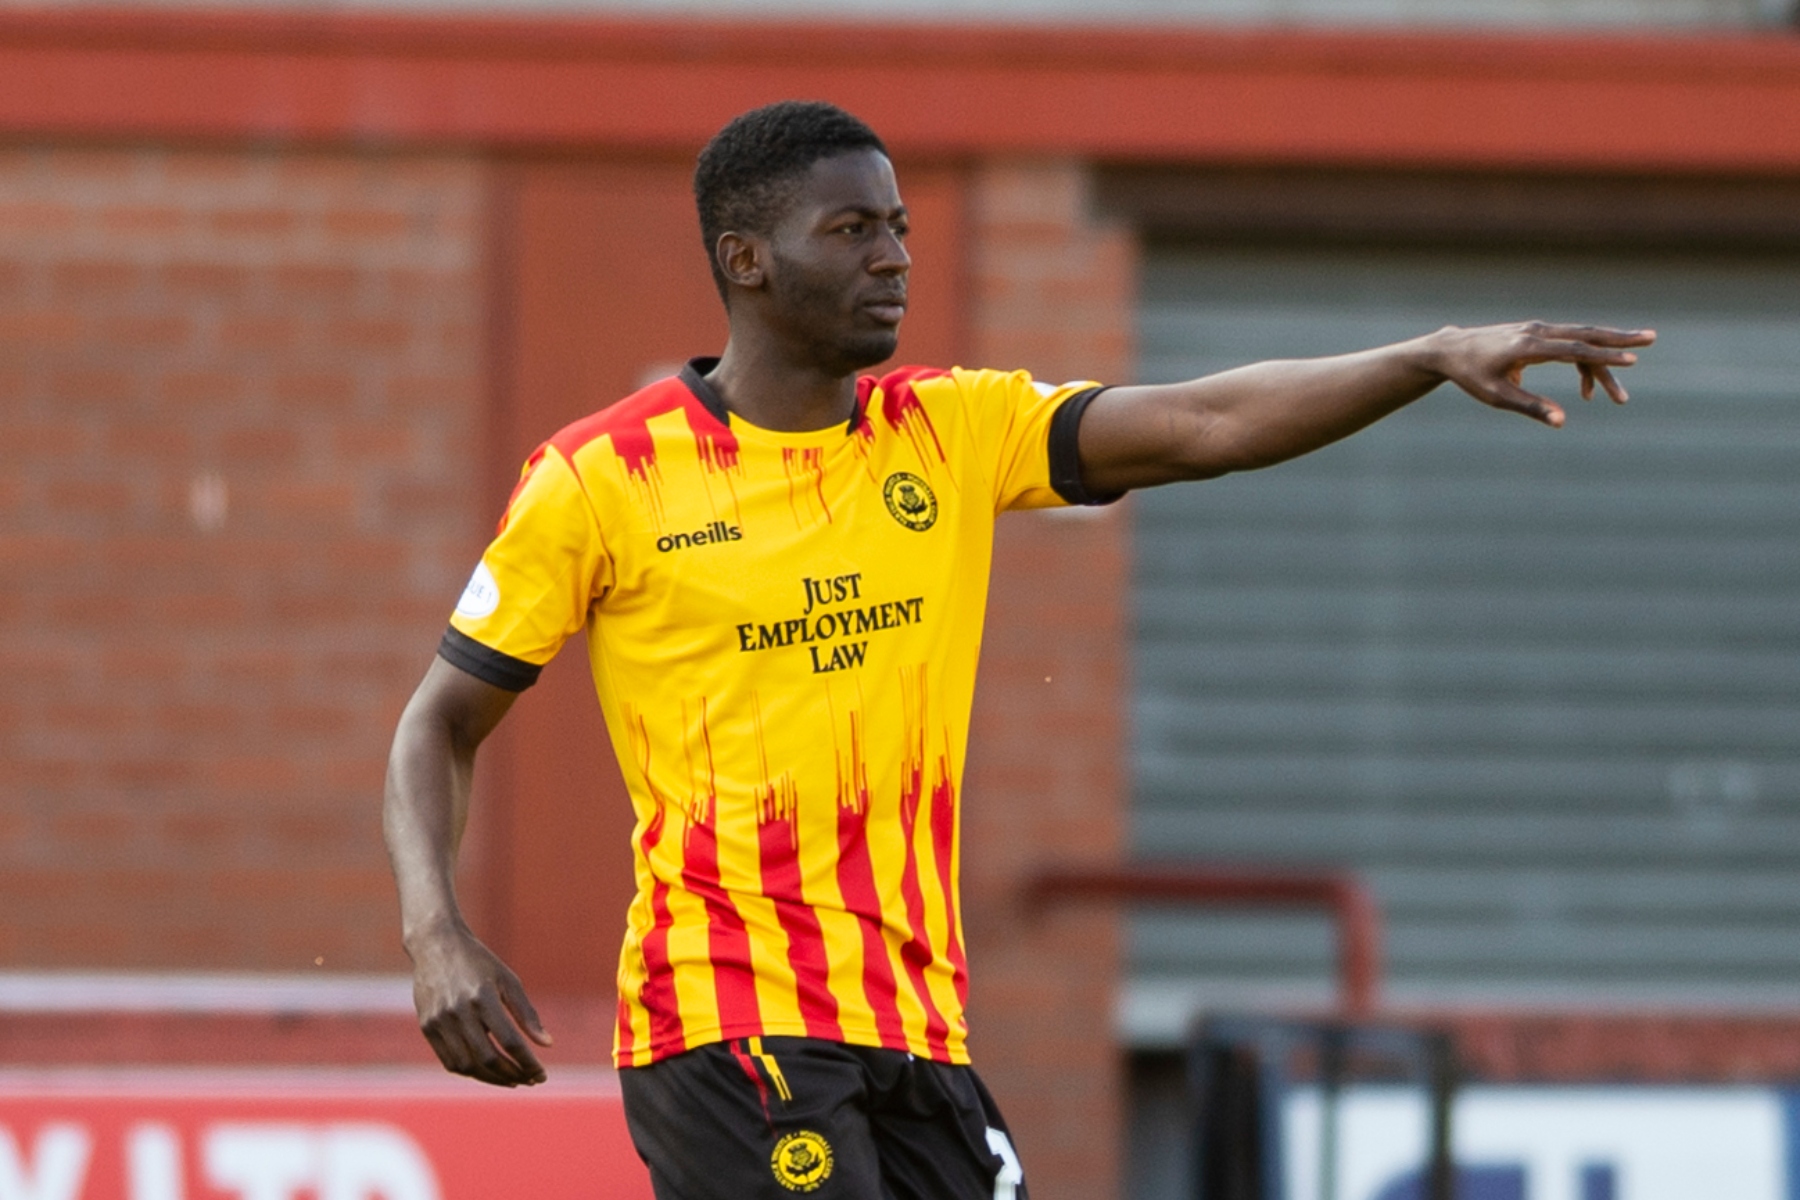 McCall delighted with Sena's versatility ahead of Dumbarton clash